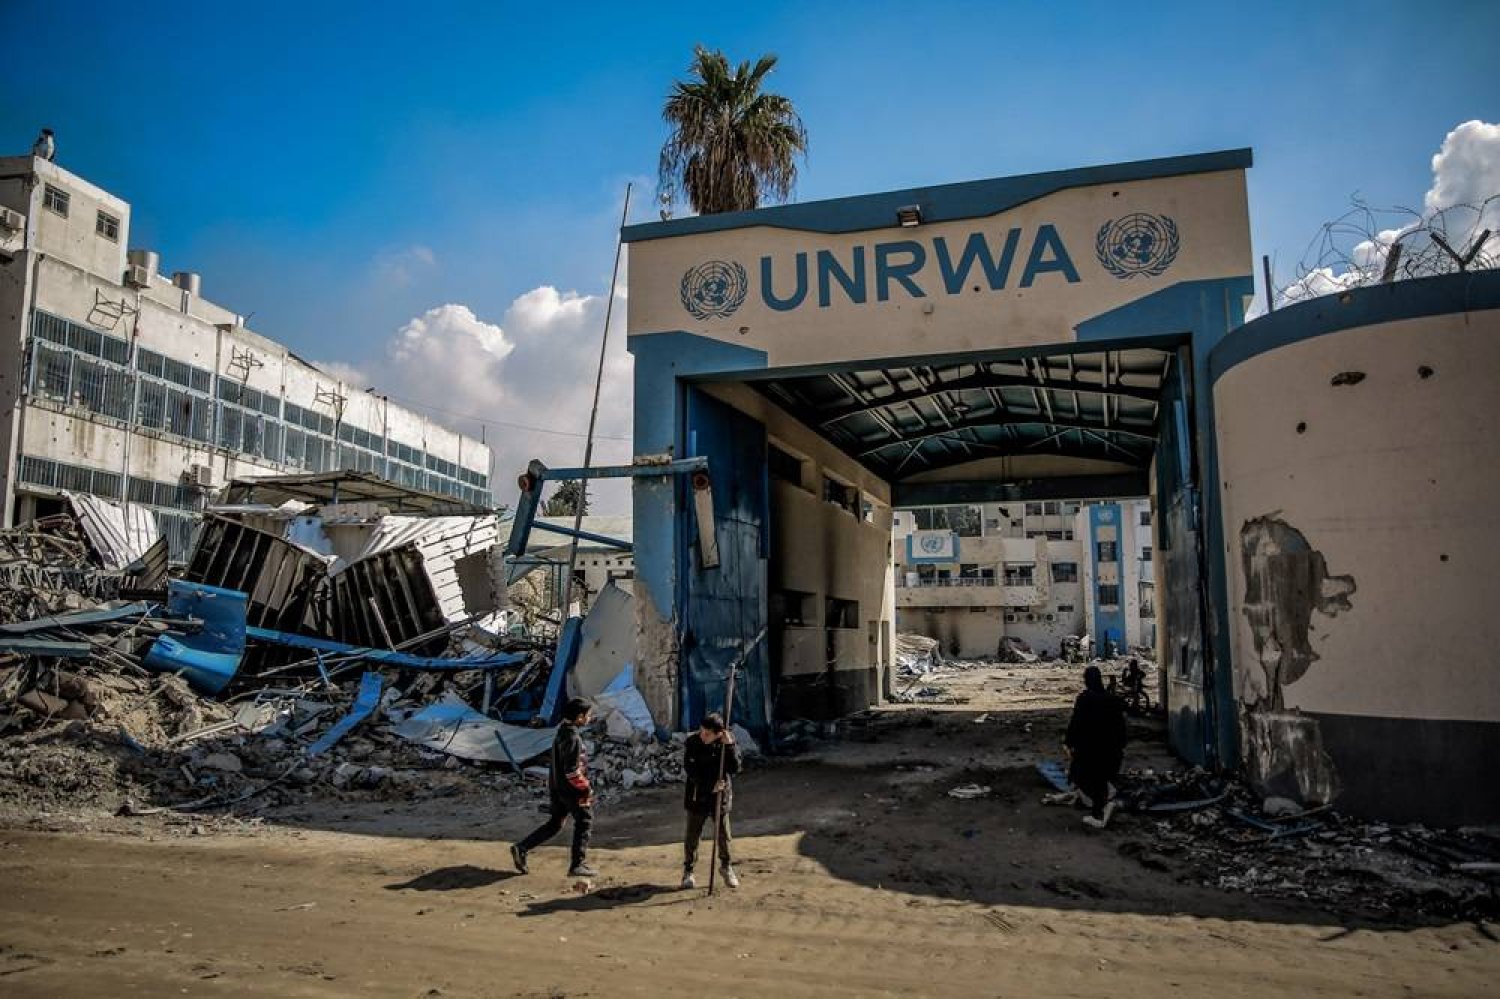 10 February 2024, Palestinian Territories, Gaza City: Palestinians examine the damage to the United Nations Relief and Works Agency for Palestine Refugees (UNRWA) buildings on their way back to their homes in the wake of the Israeli army withdrew from North of Gaza City. (dpa)